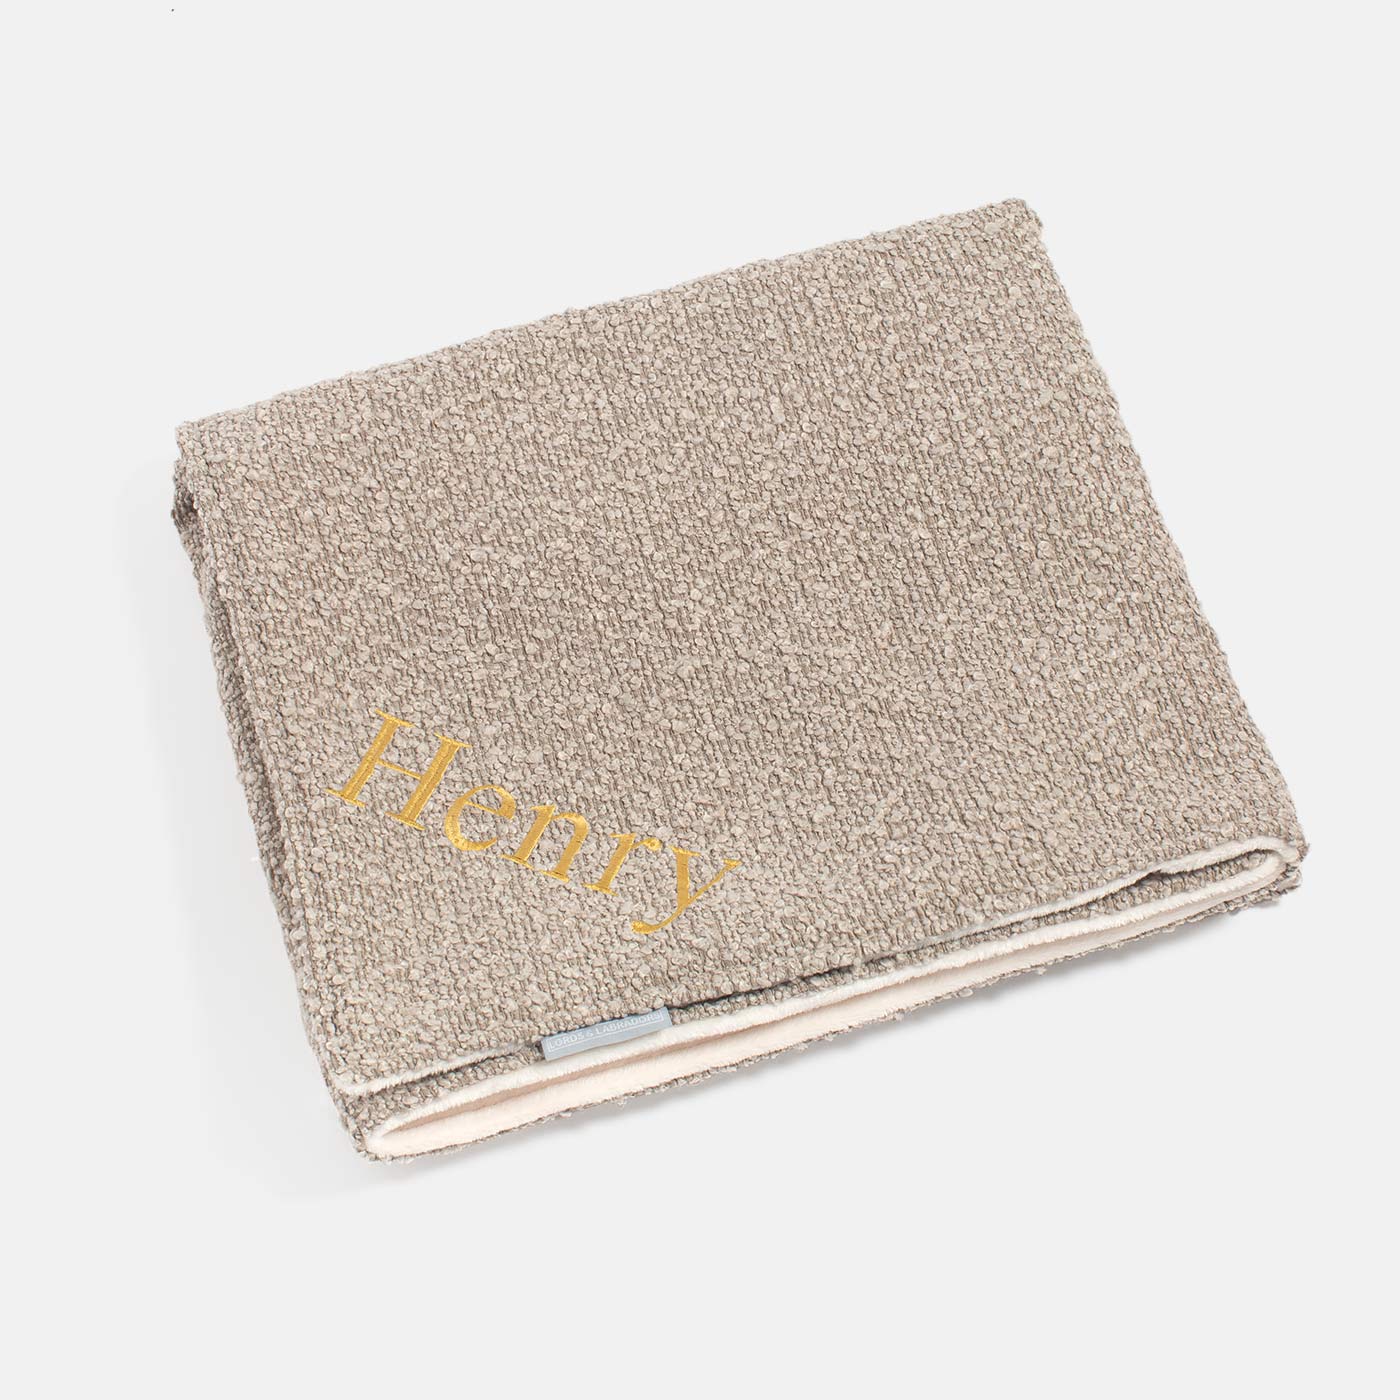 Discover Our Luxurious Dog Blanket In Luxury Mink Bouclé Super Soft Sherpa & Teddy Fleece Lining, The Perfect Blanket For Puppies, Available To Personalise And In 2 Sizes Here at Lords & Labradors